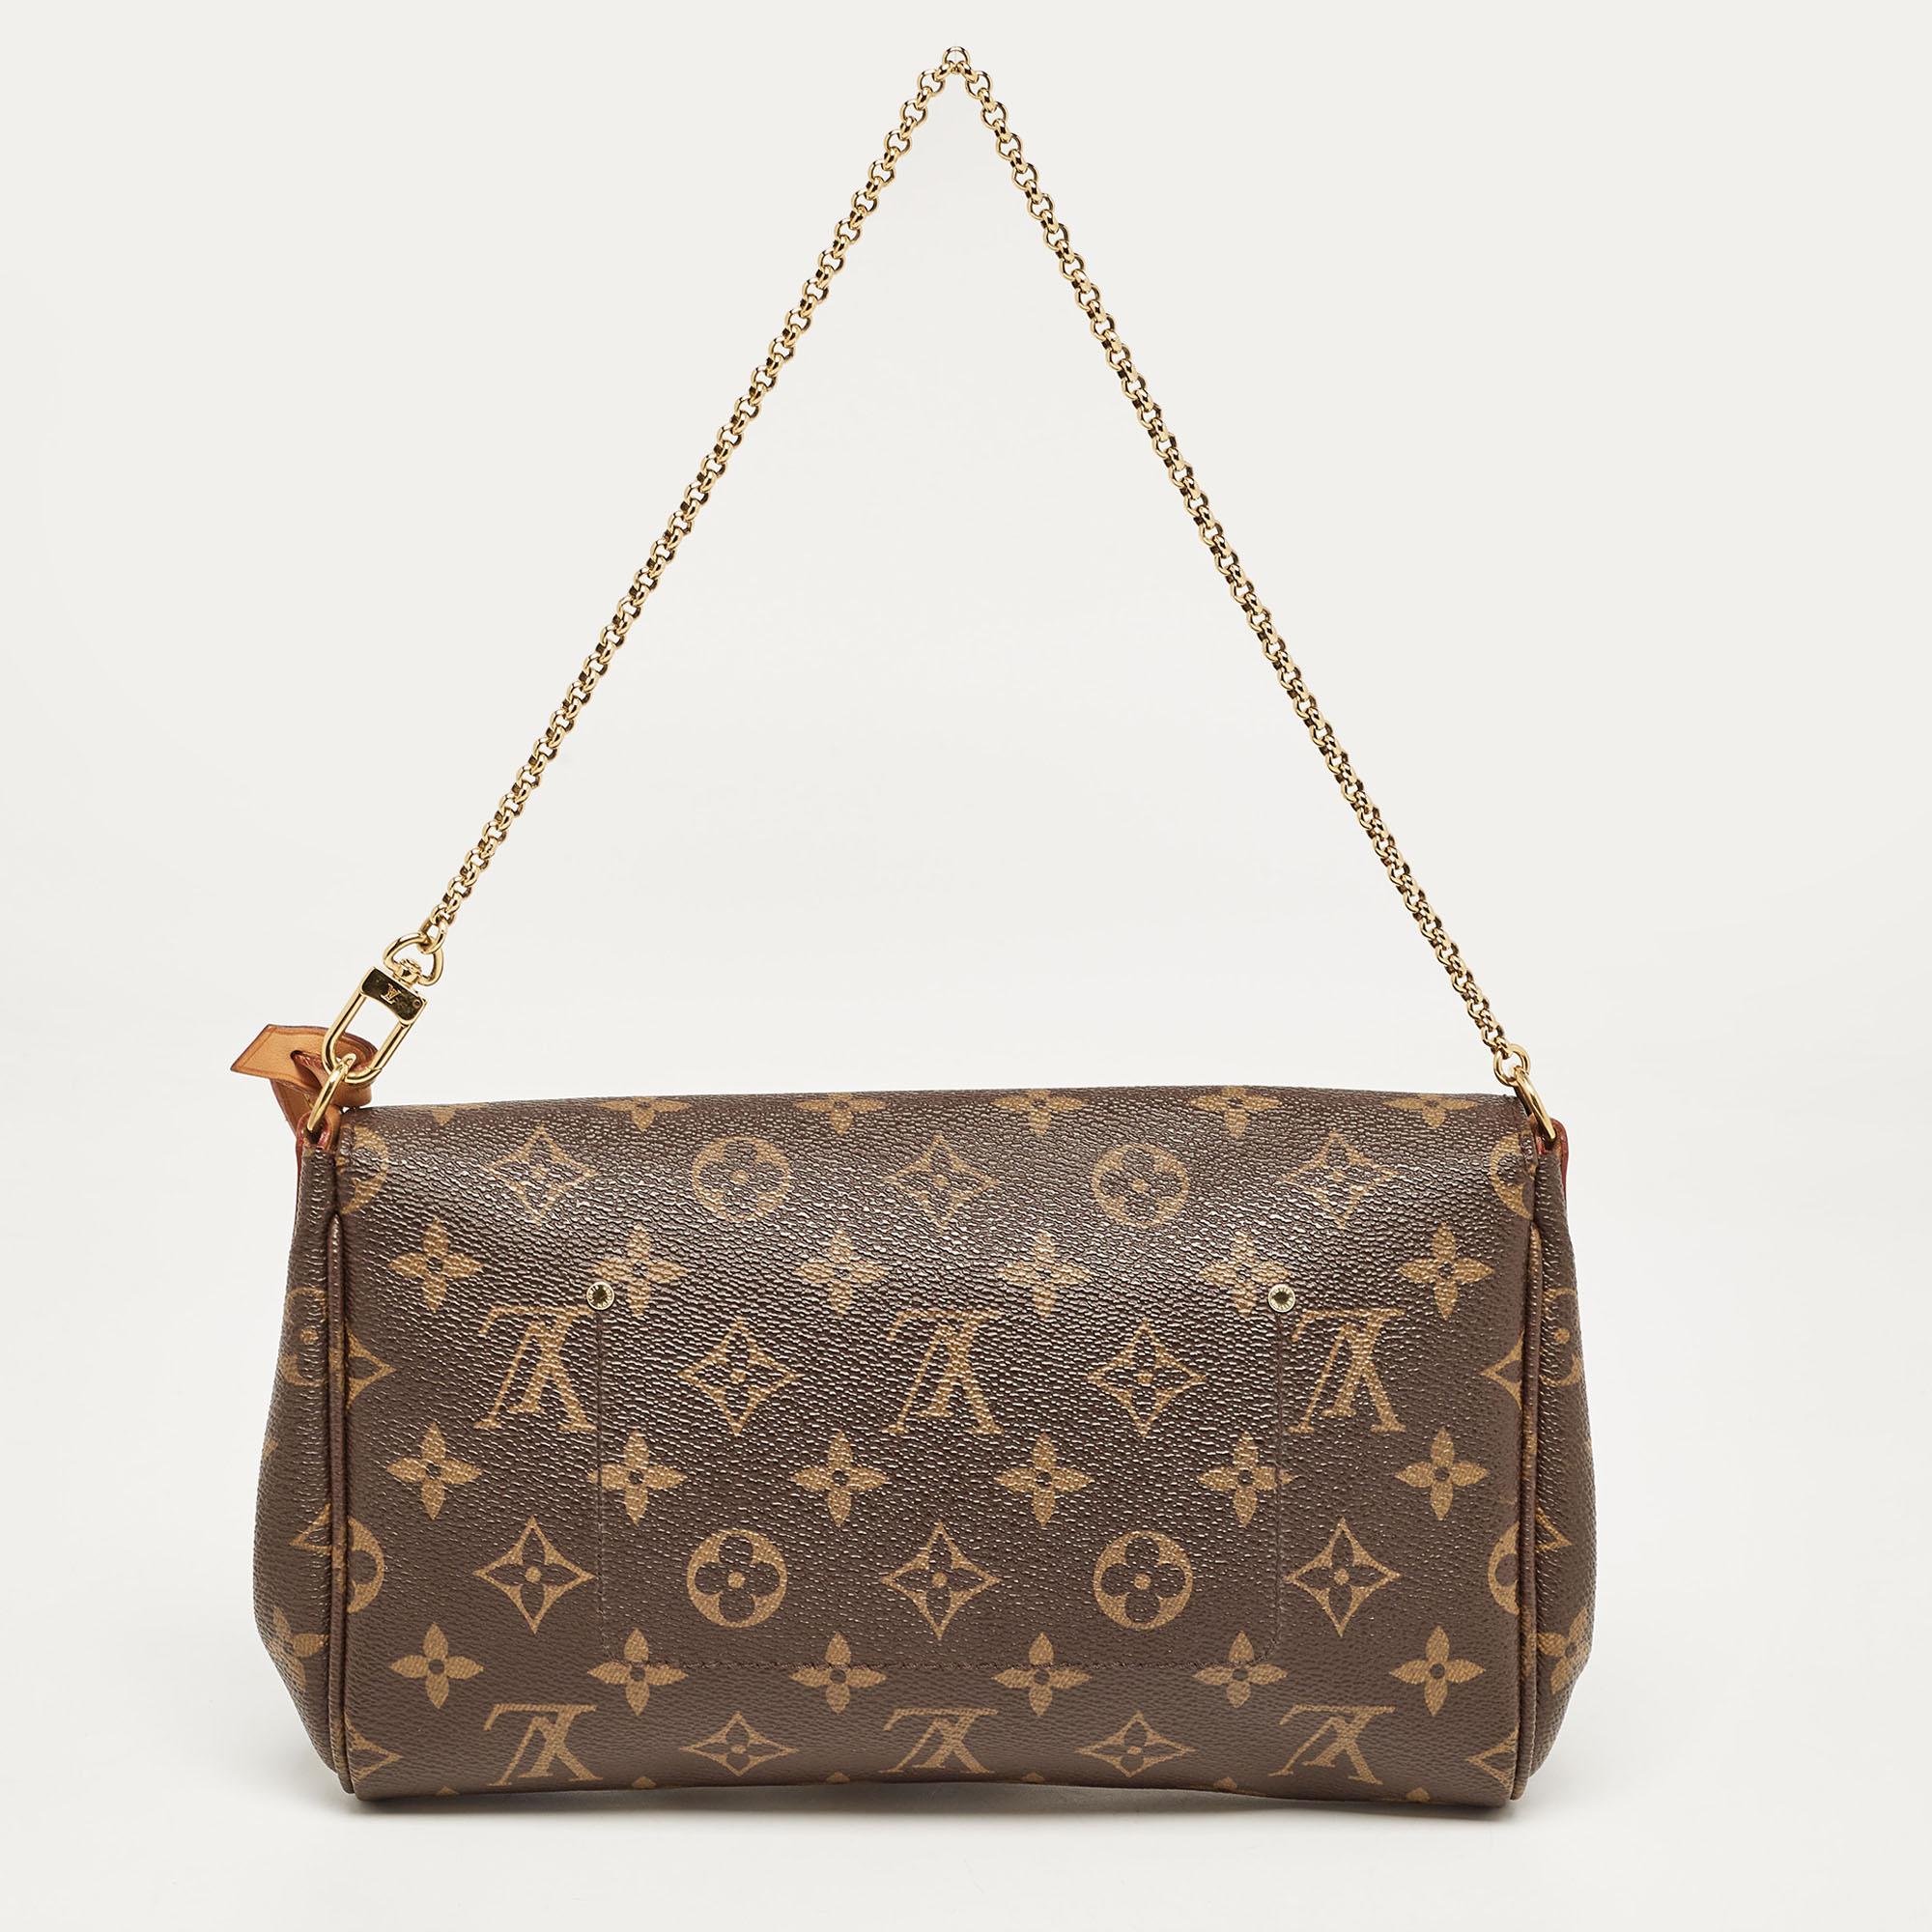 Crafted from quality materials, your wardrobe is missing out on this beautifully made designer bag by Louis Vuitton. Look your fashionable best in any outfit with this stylish bag that promises to elevate your ensemble.

Includes: Original Dustbag,